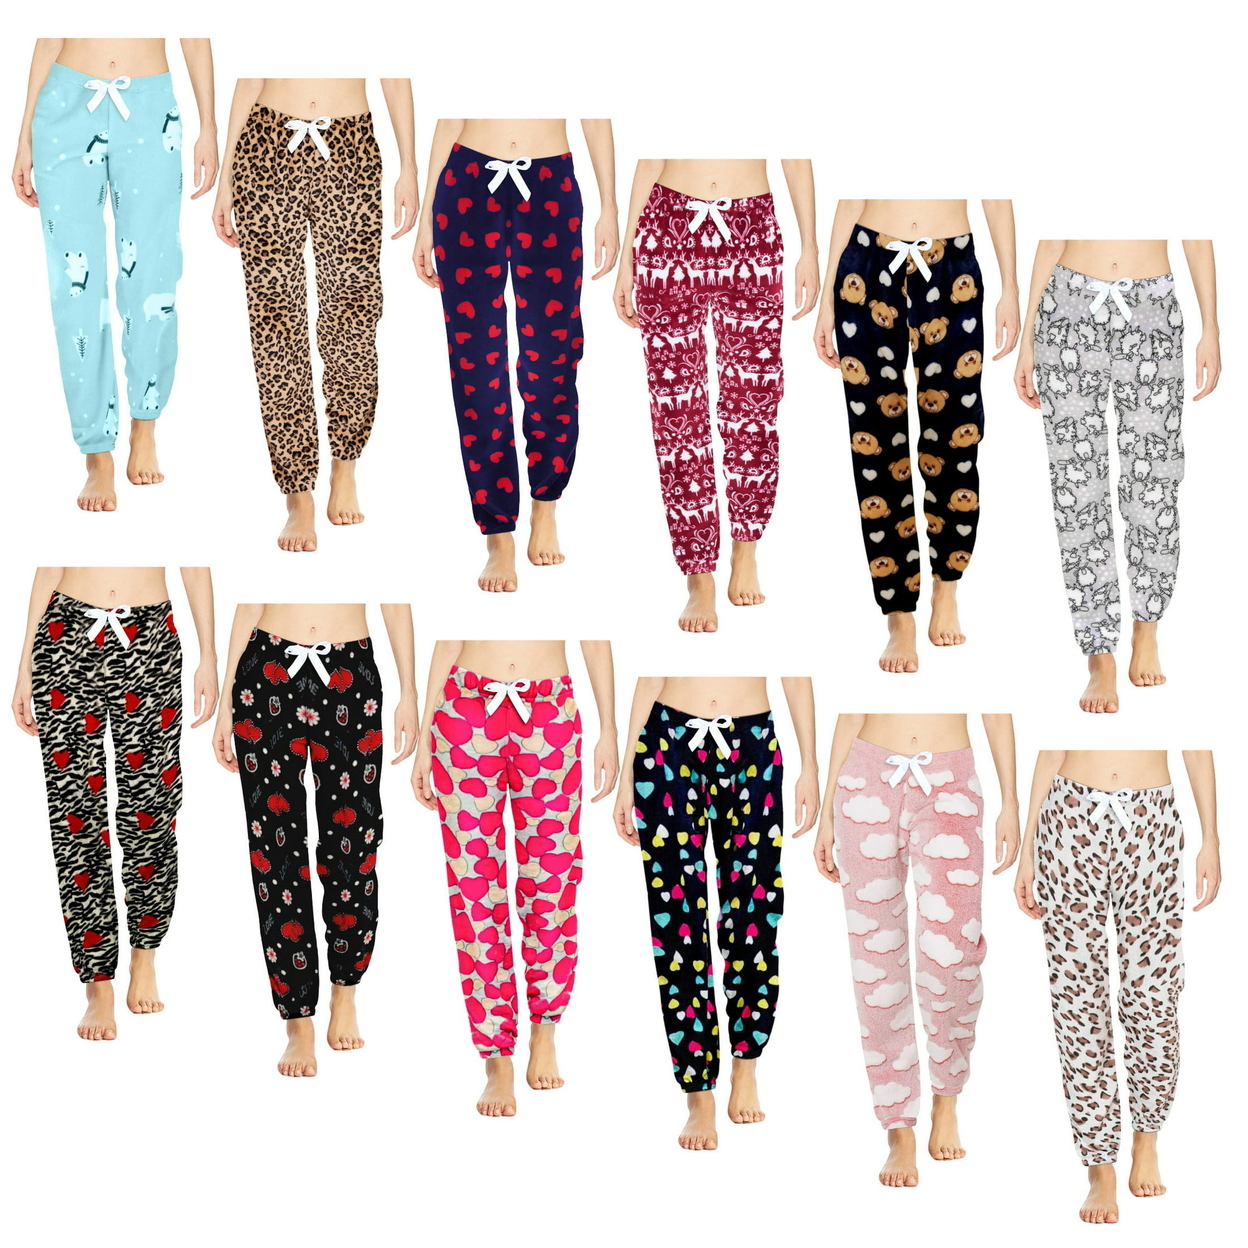 Multi-Pack: Women's Printed Ultra-Soft Comfy Stretch Micro-Fleece Pajama Lounge Pants - 3-pack, Animal, Xx-large